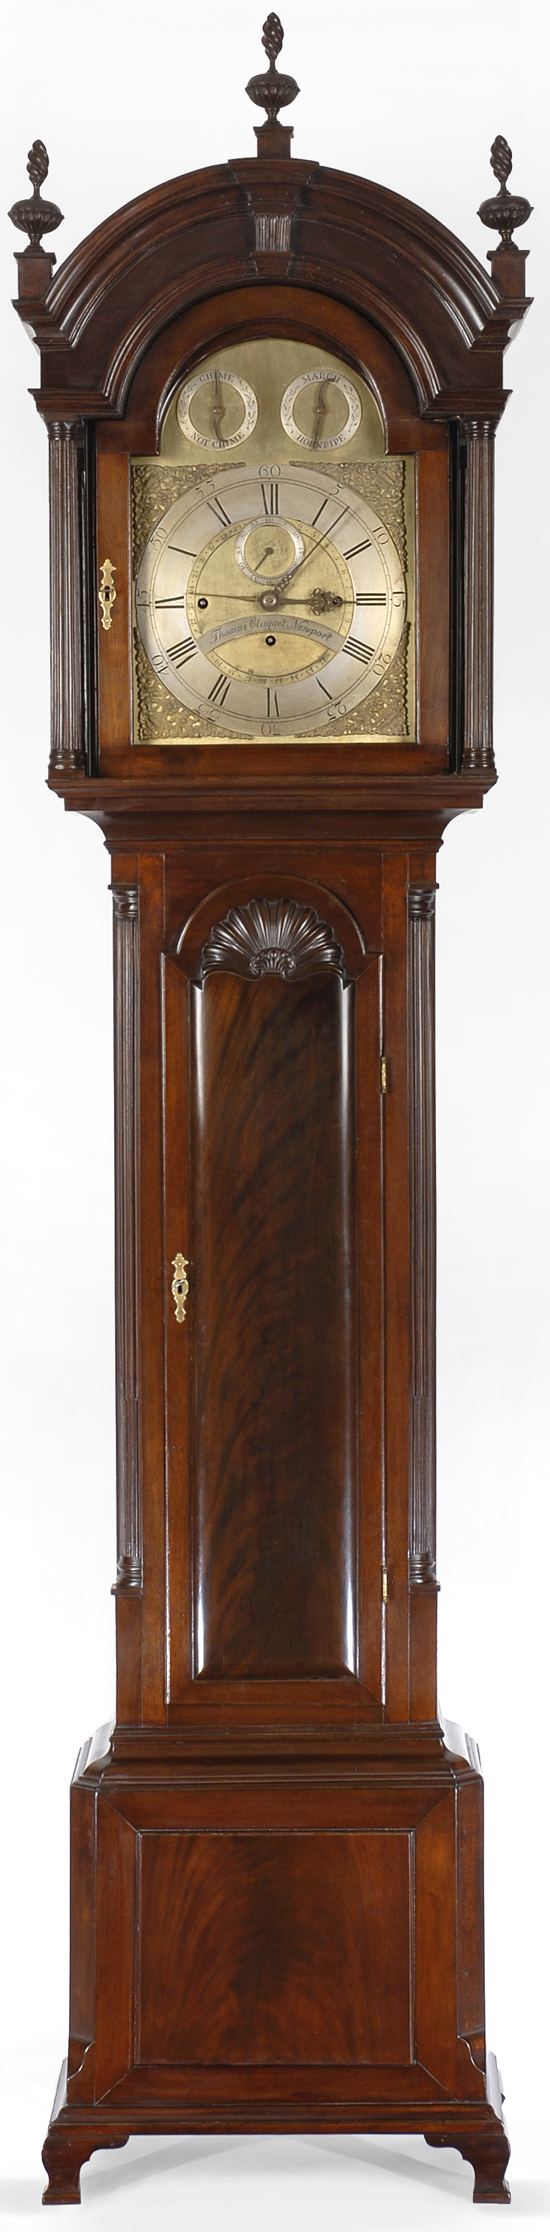 A rare and important Chippendale musical block and shell tall case clock by Thomas Claggett, Newport, circa 1775-80.